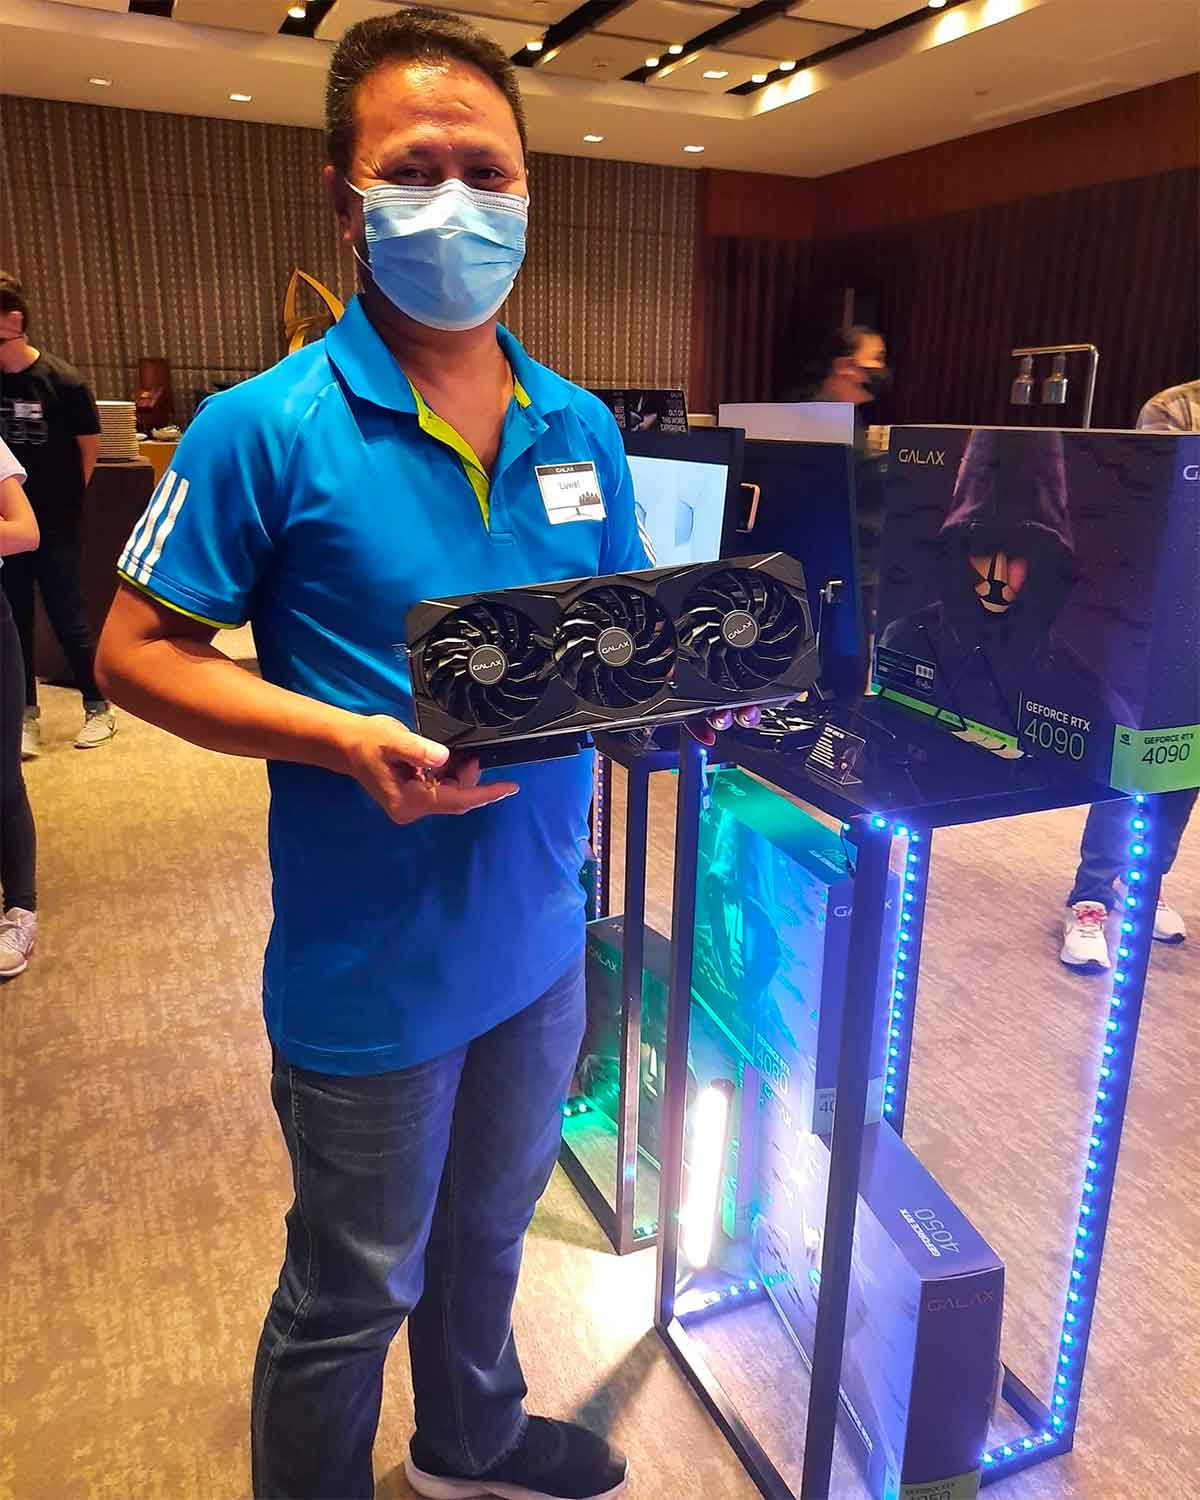 GALAX shows the box of its GeForce RTX 4050